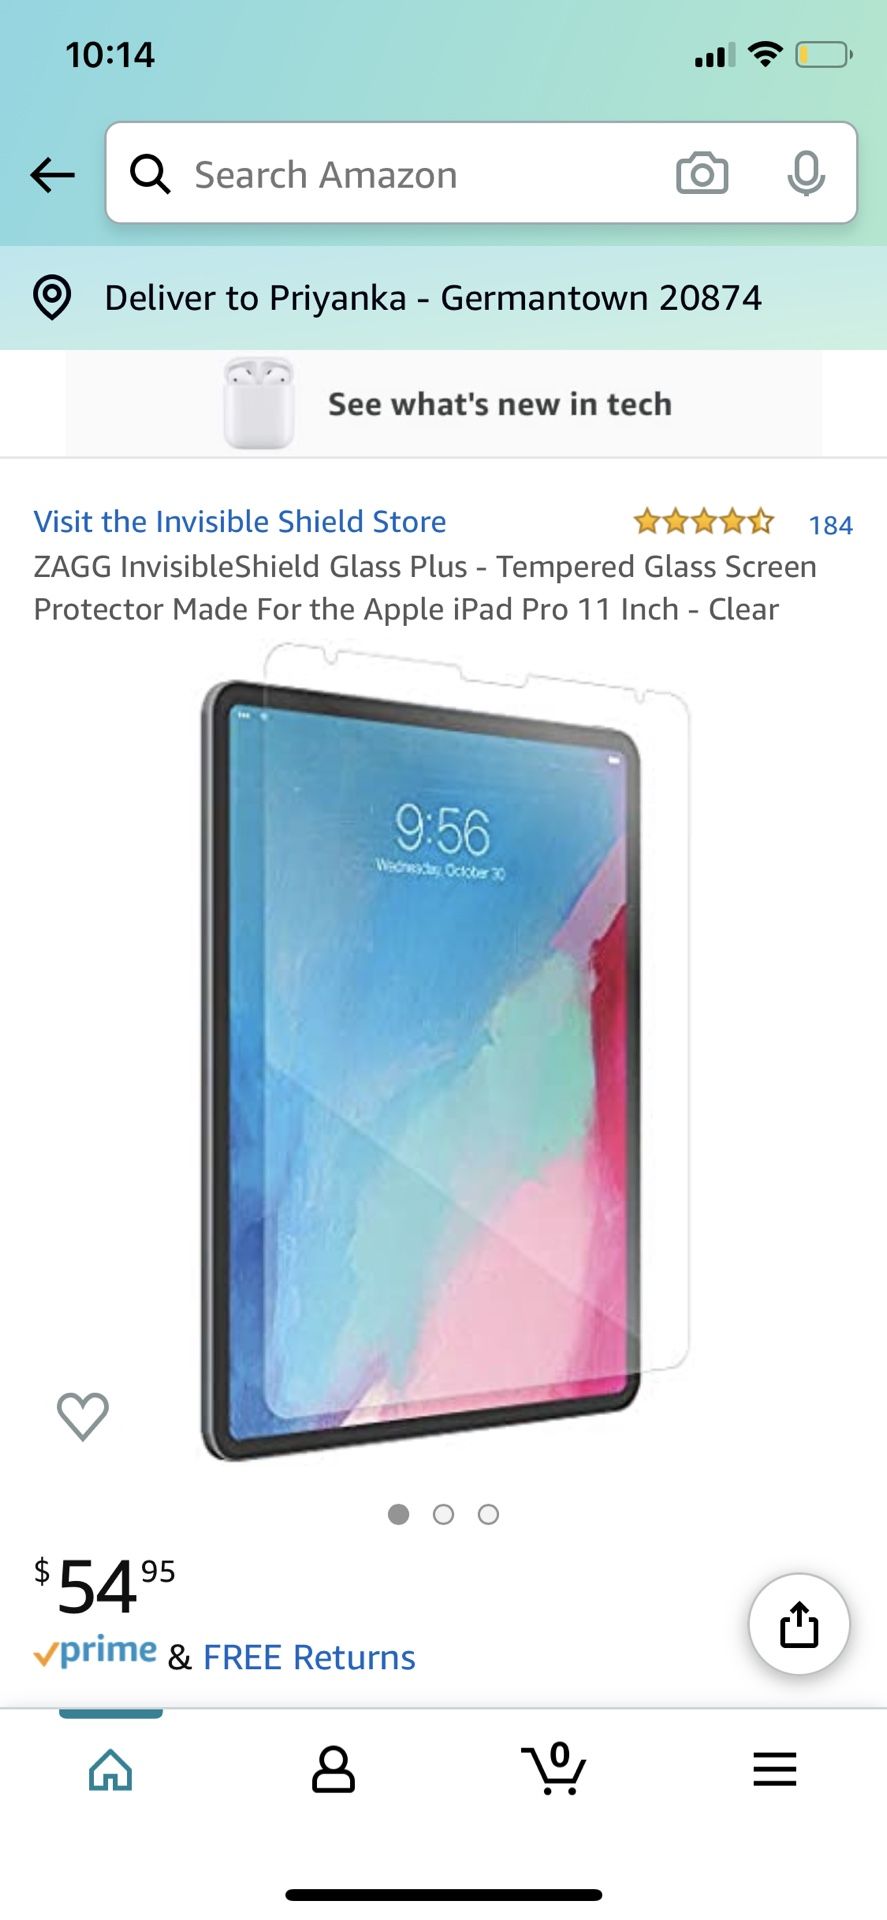 ZAGG InvisibleShield Glass Plus - Tempered Glass Screen Protector Made For the Apple iPad Pro 11 Inch - Clear